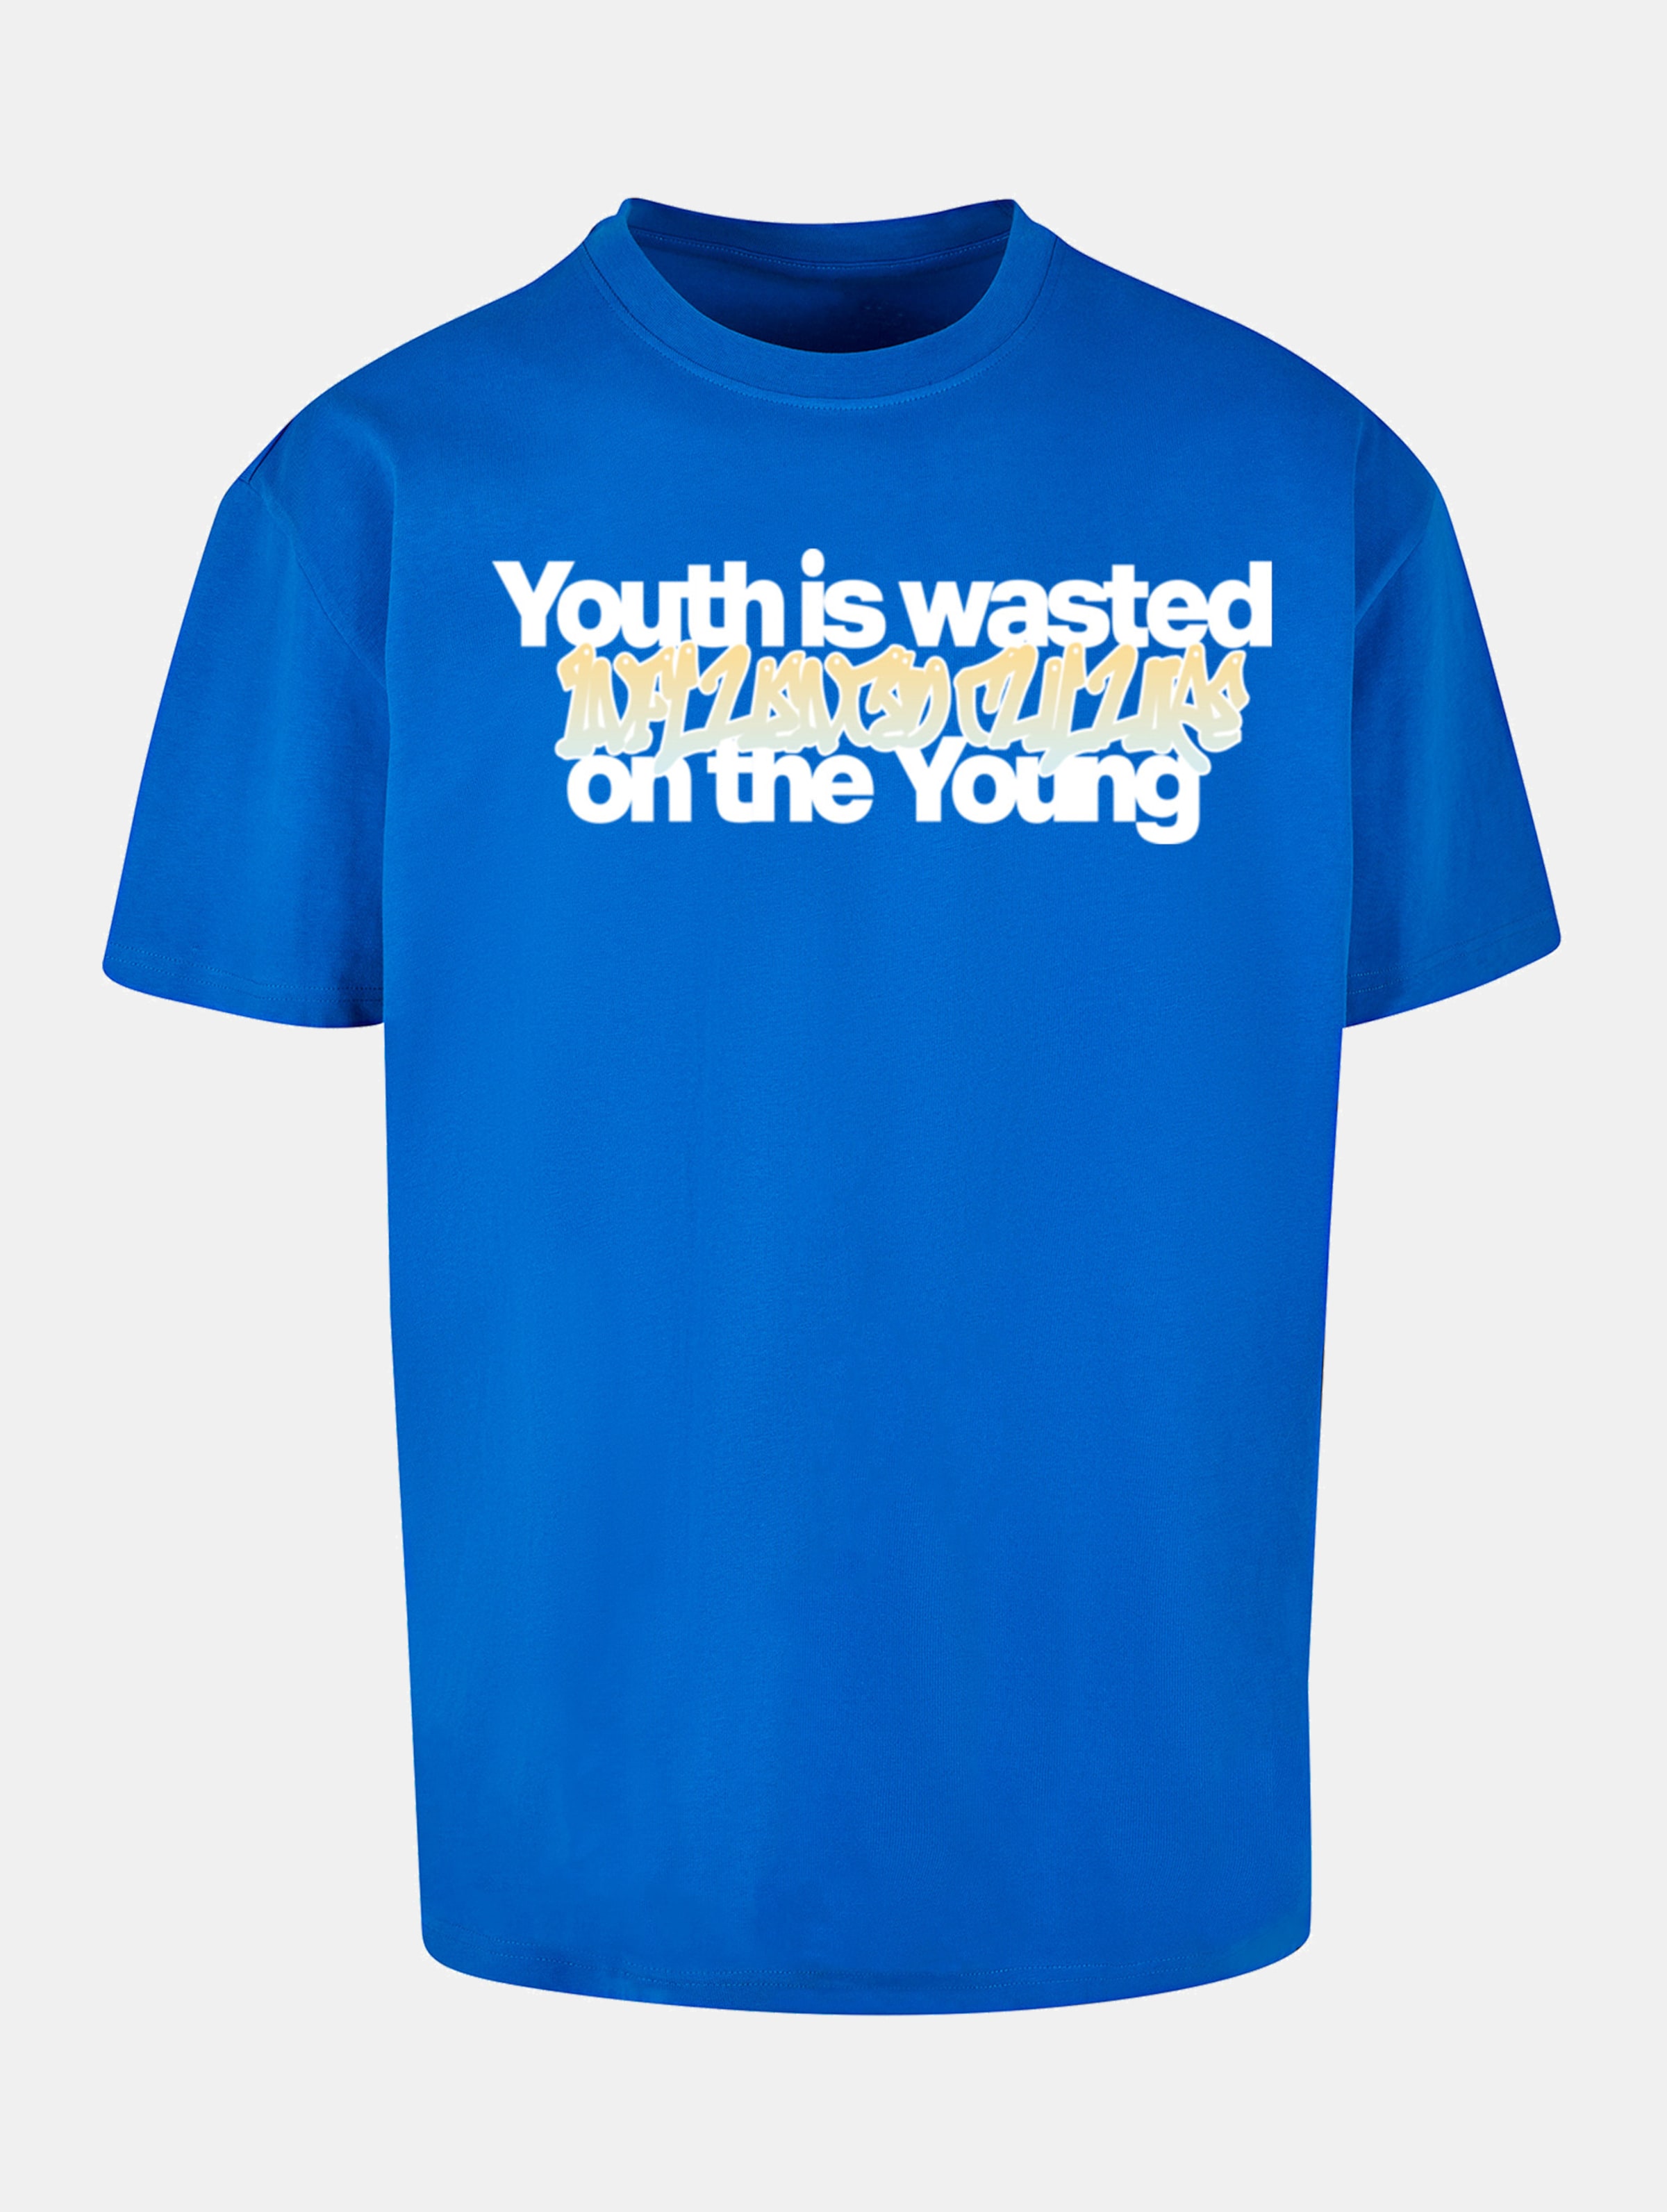 Lost Youth LY TEE- WASTED Männer,Unisex op kleur blauw, Maat XS